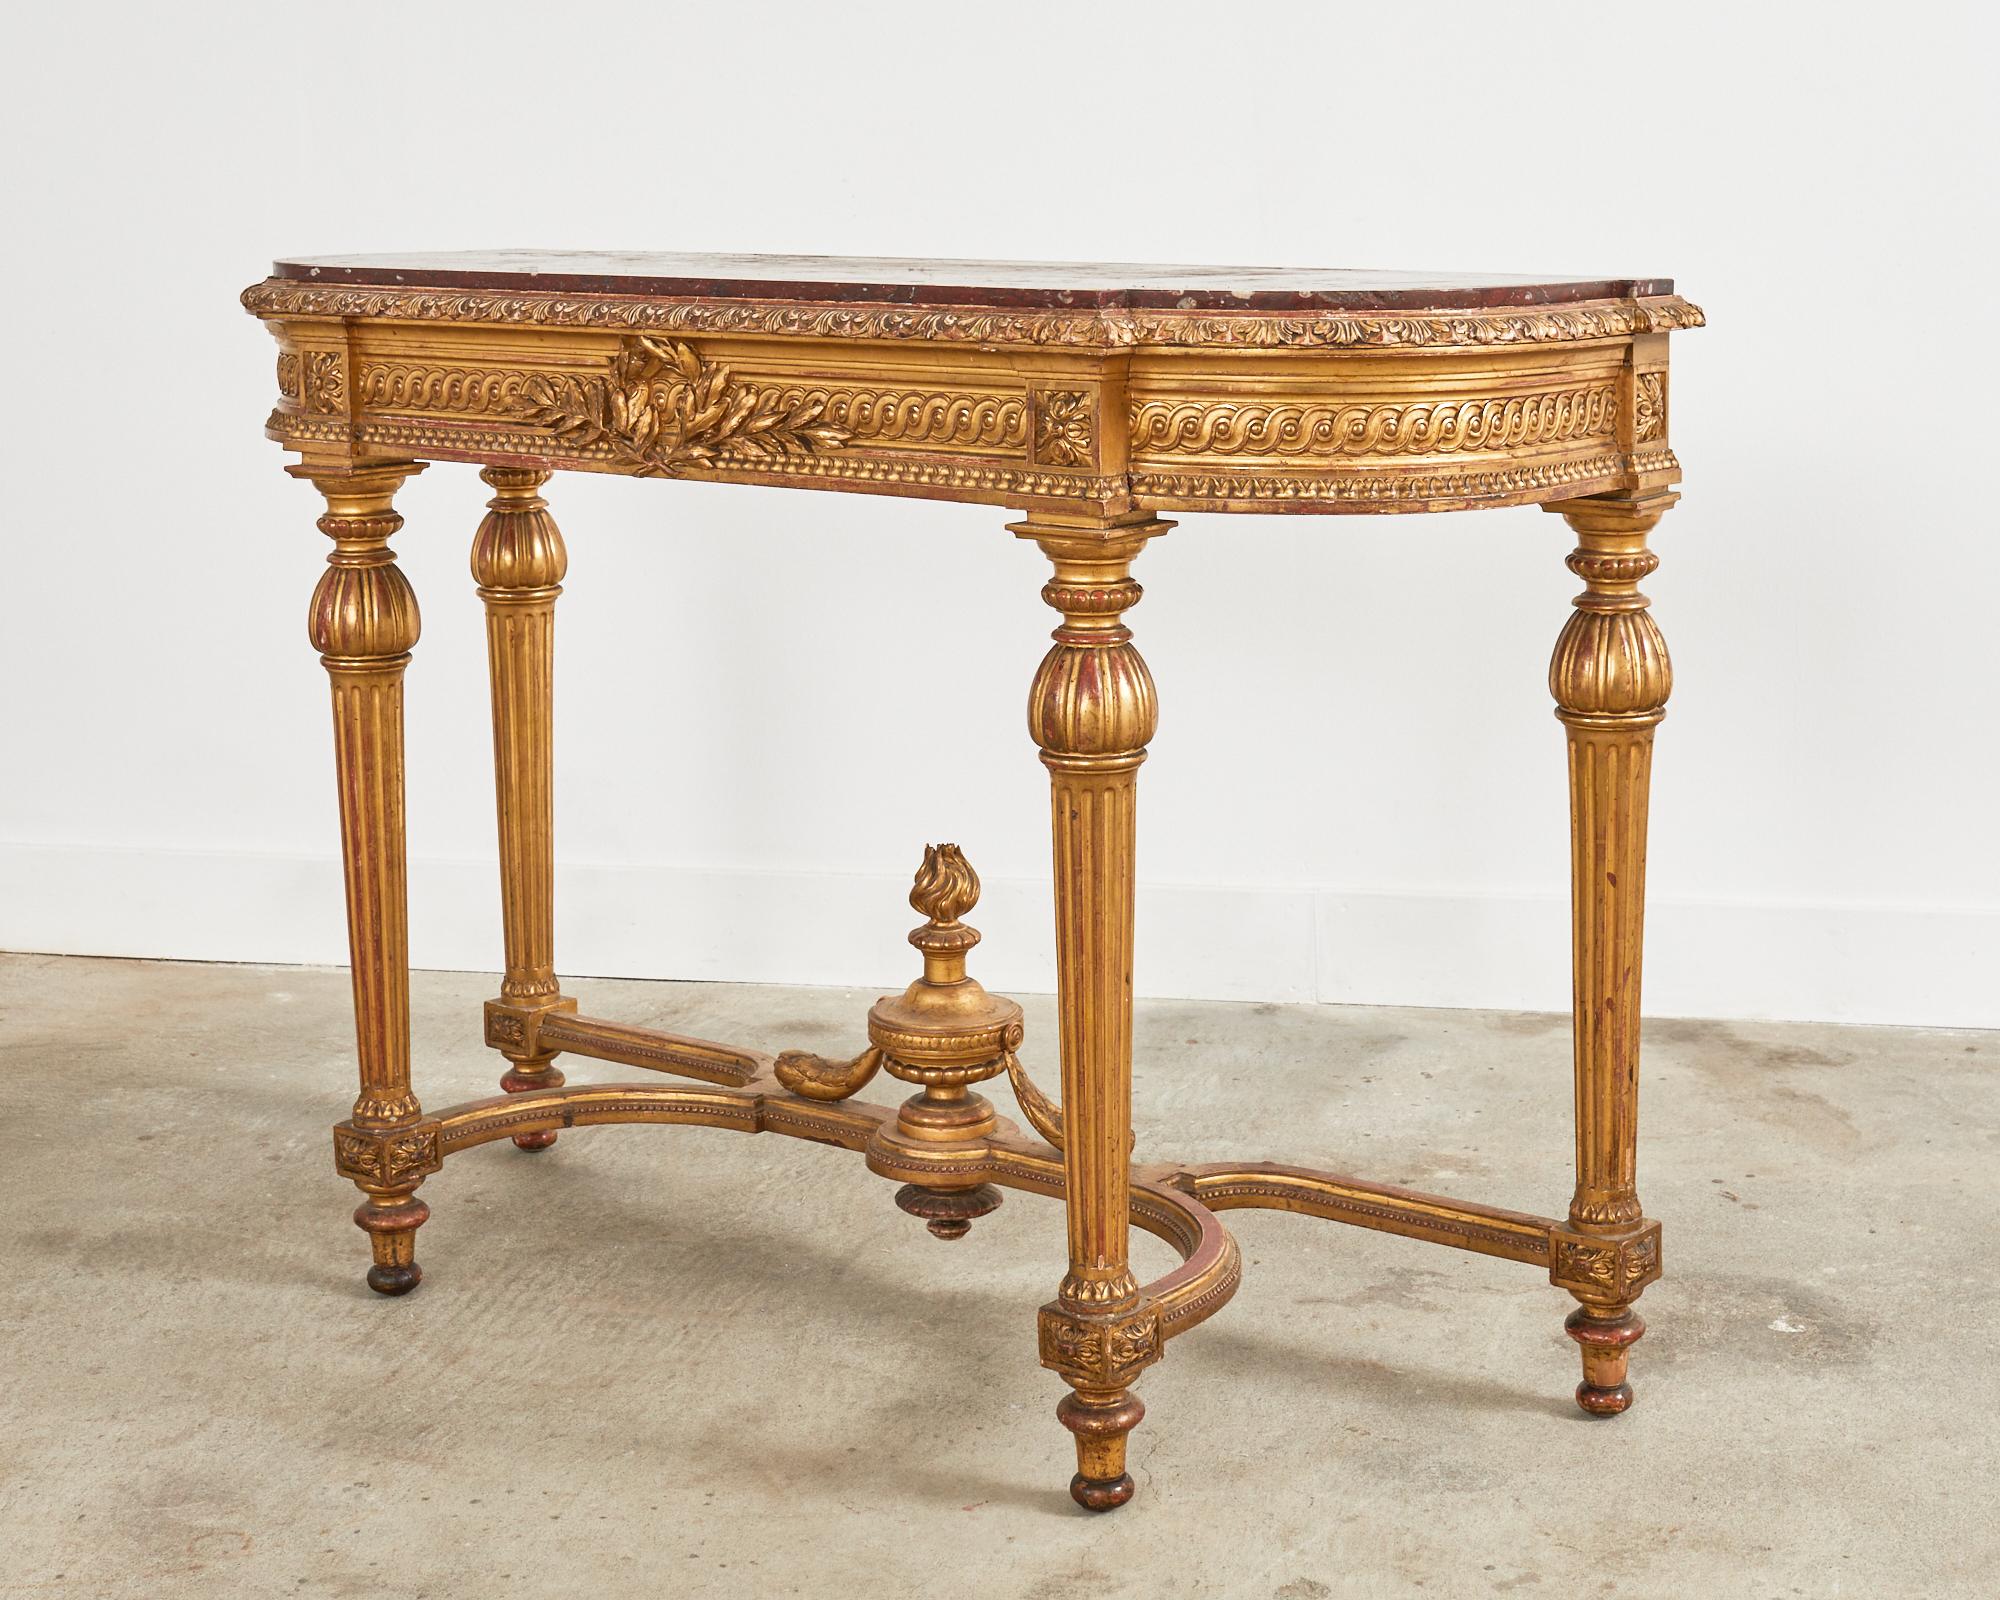 19th Century French Empire Neoclassical Marble Top Console Table For Sale 4